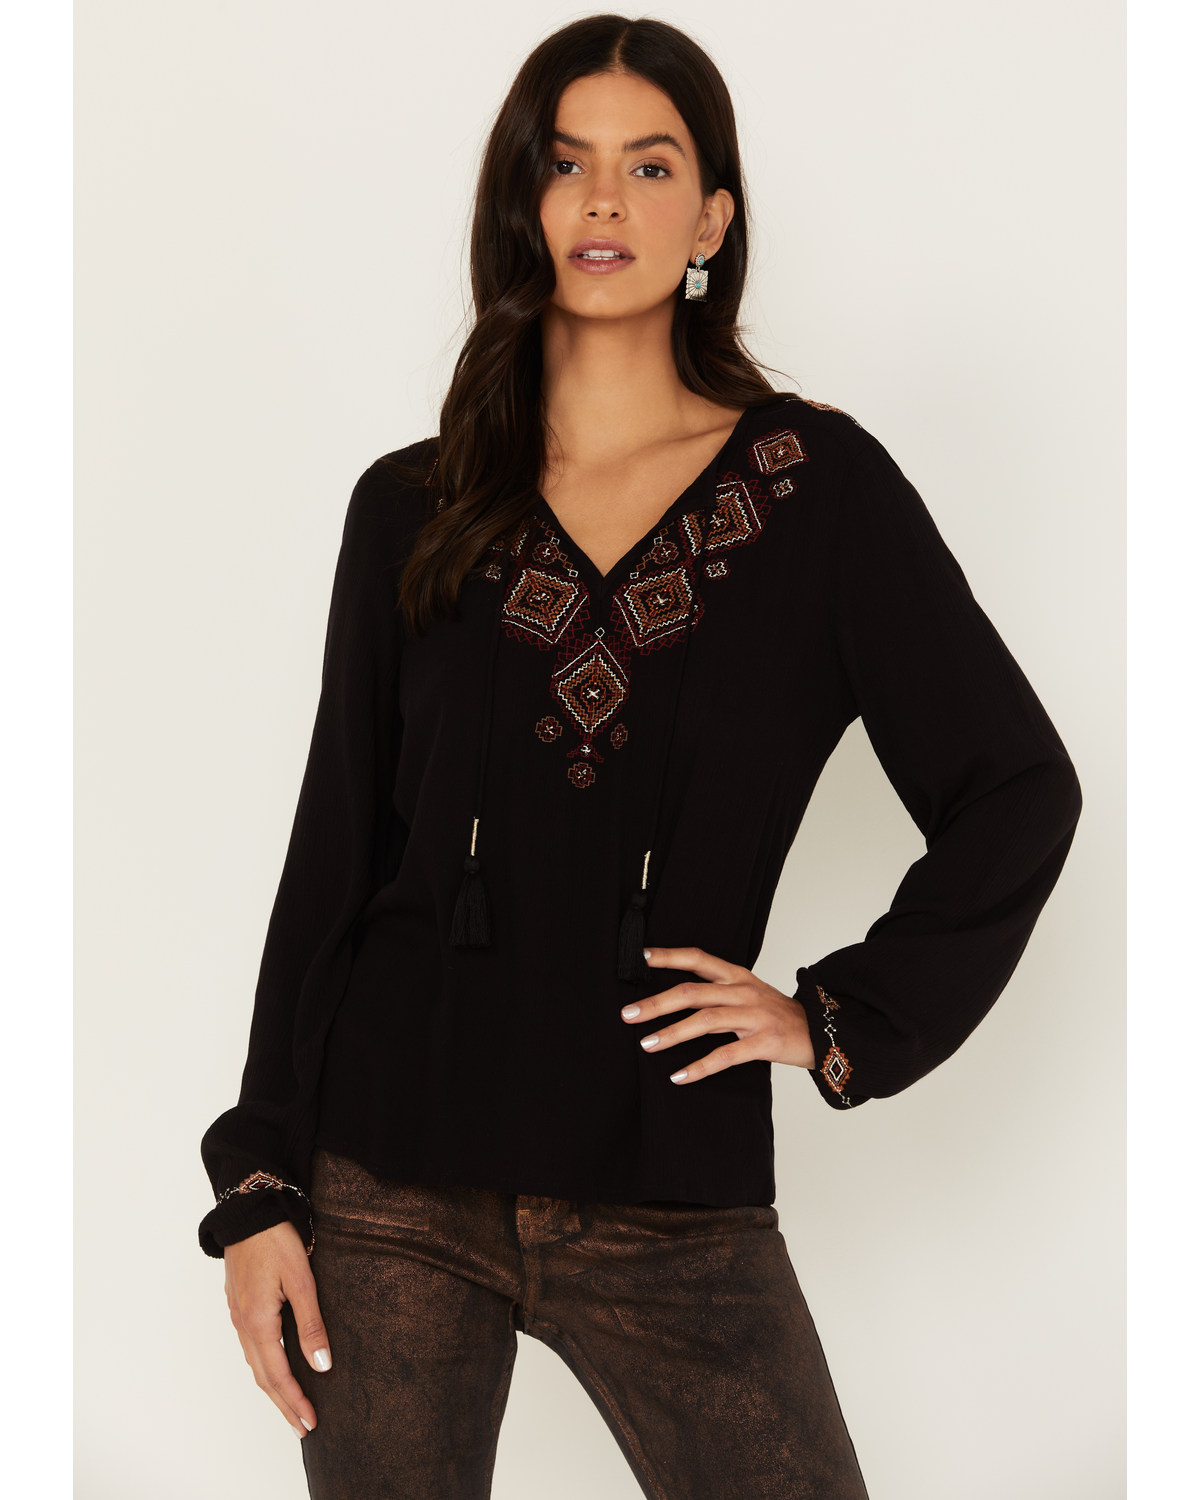 Idyllwind Women's Magnolia Embroidered Top